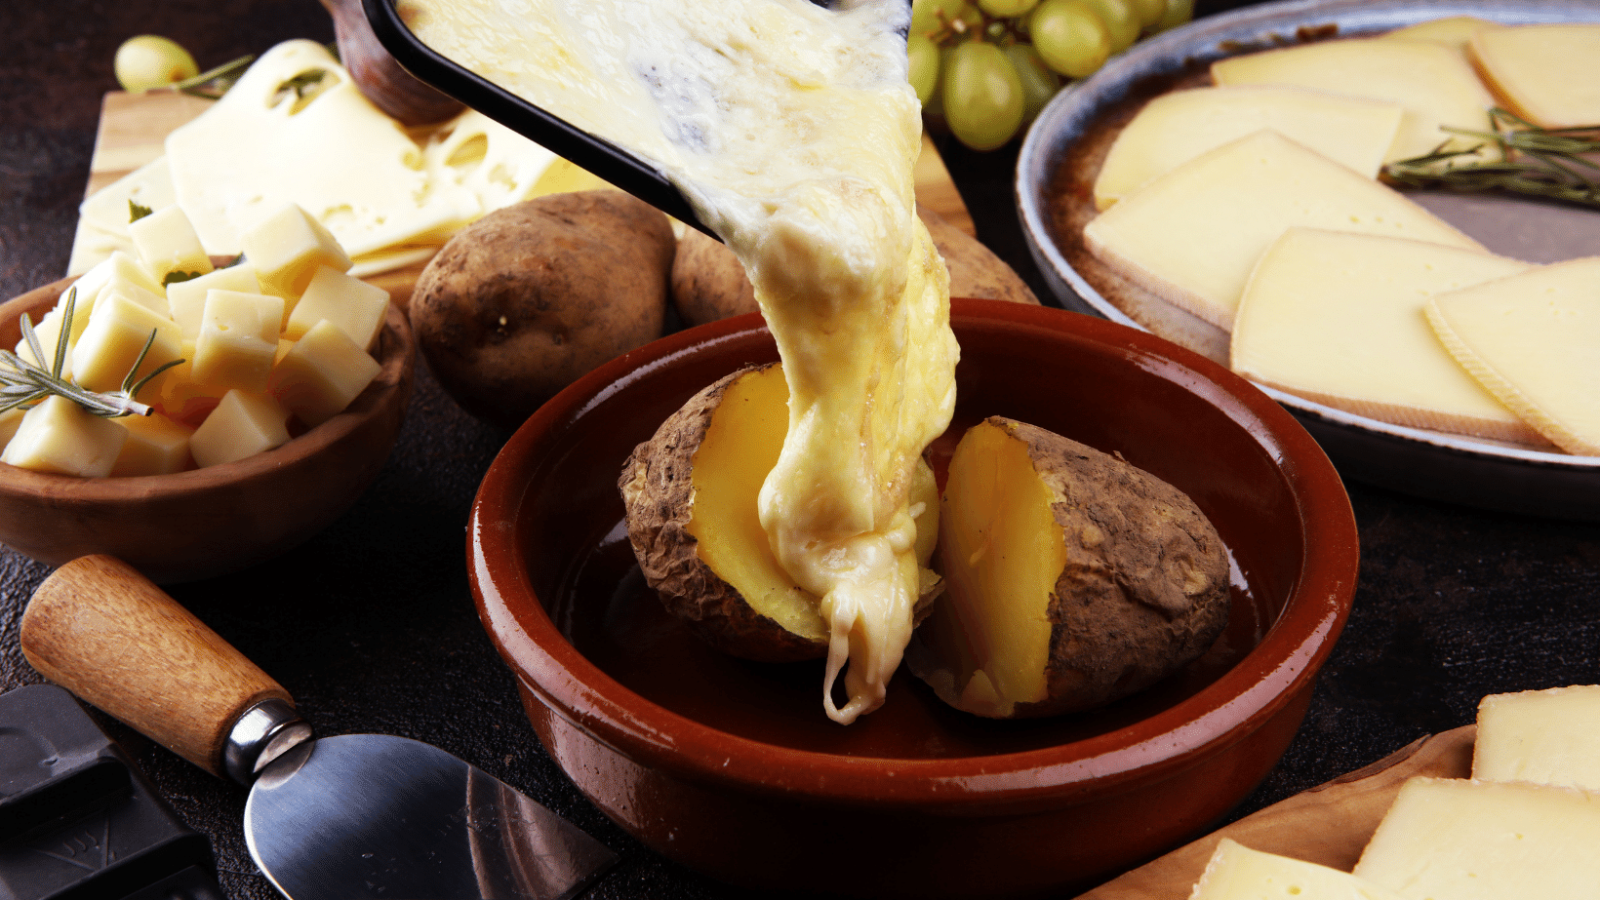 Image of Raclette Dinner Recipe with Roasted Vegetables